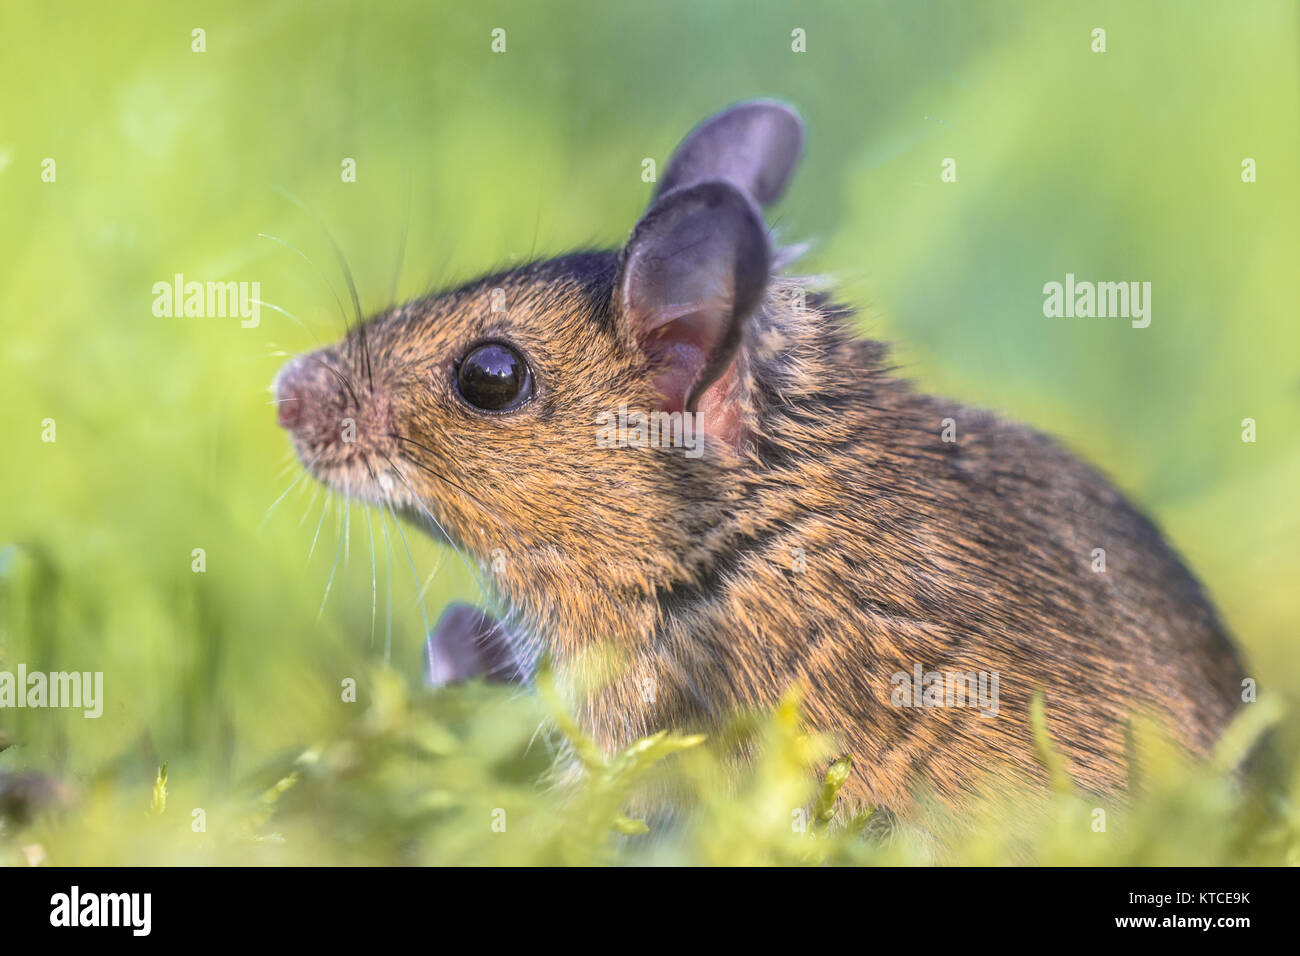 Head of Cute Wood mouse (Apodemus sylvaticus) reaching out of green moss natural environment Stock Photo